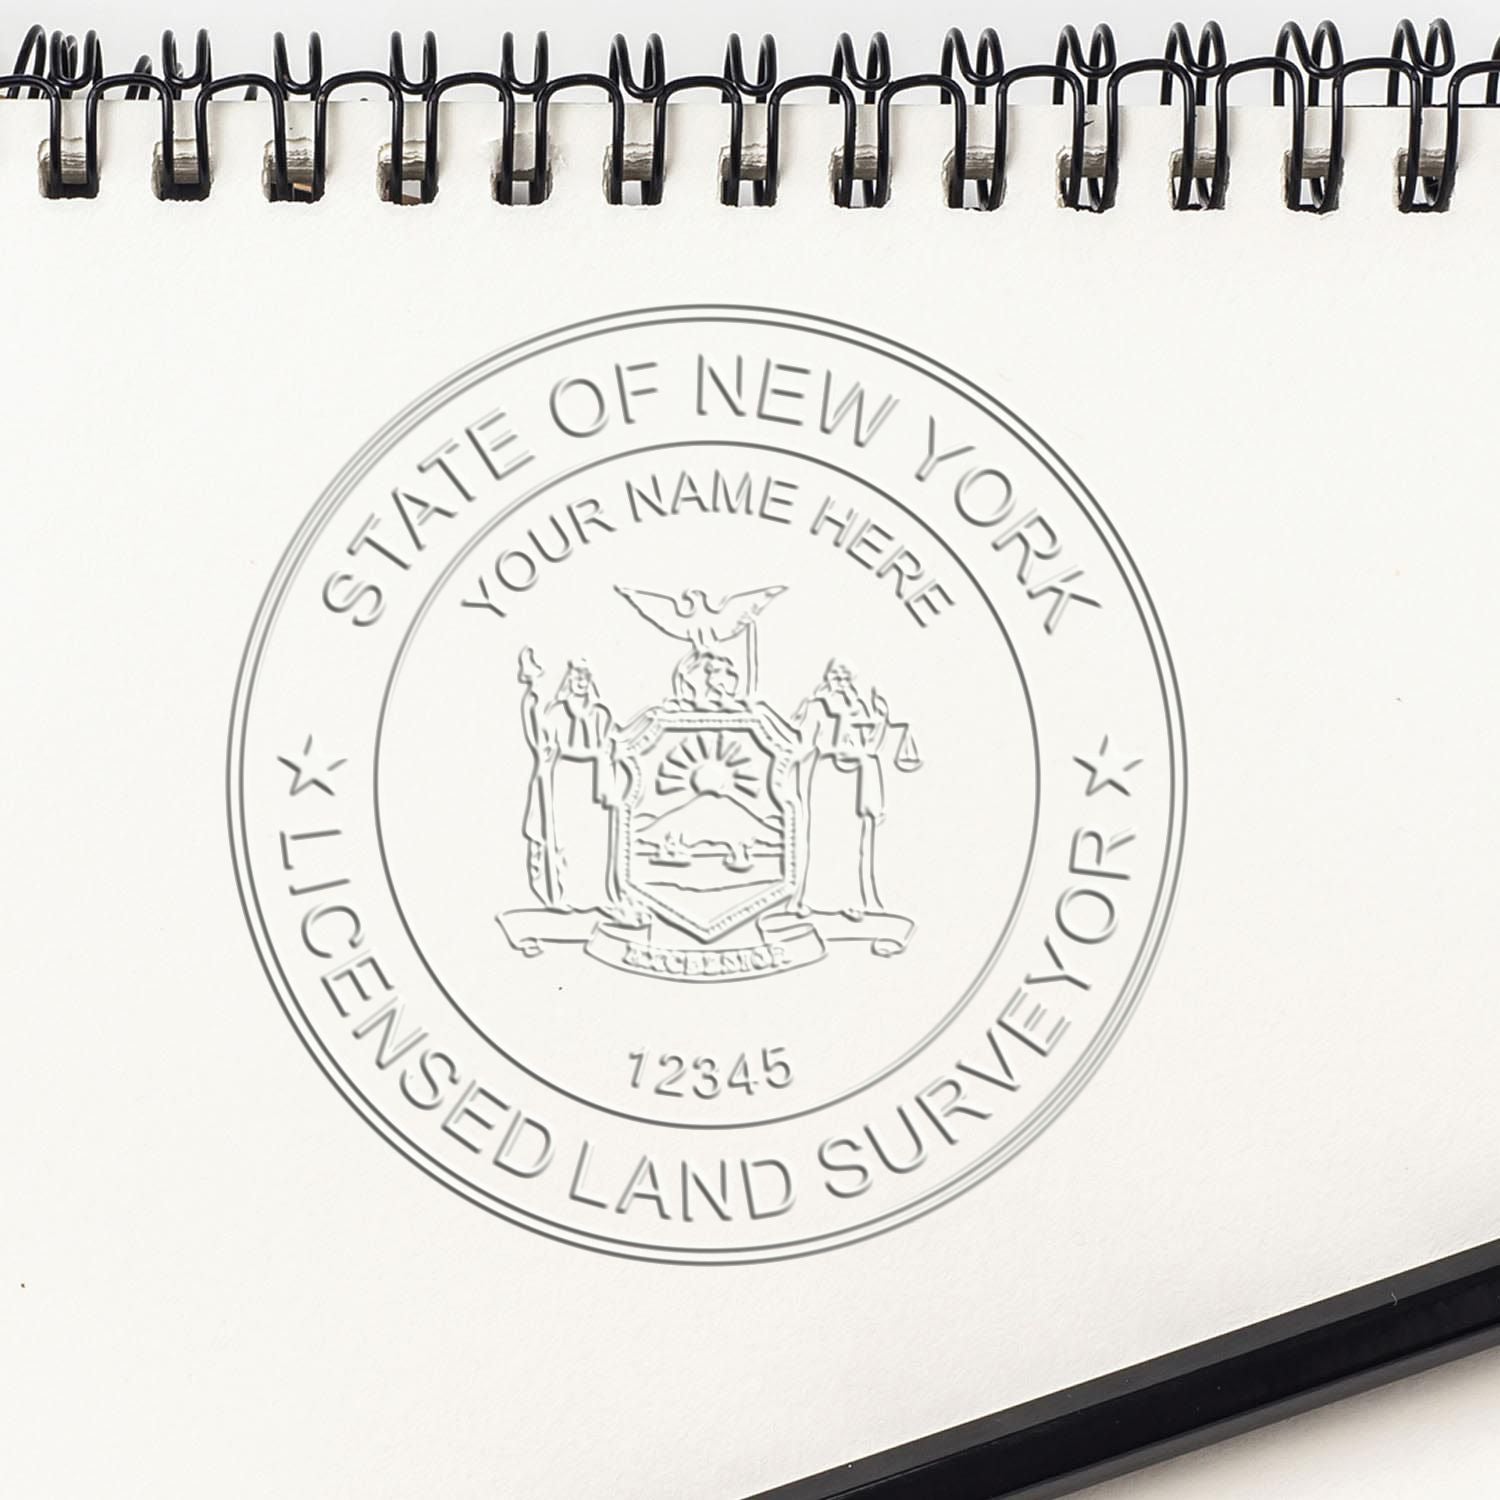 Another Example of a stamped impression of the Heavy Duty Cast Iron New York Land Surveyor Seal Embosser on a piece of office paper.